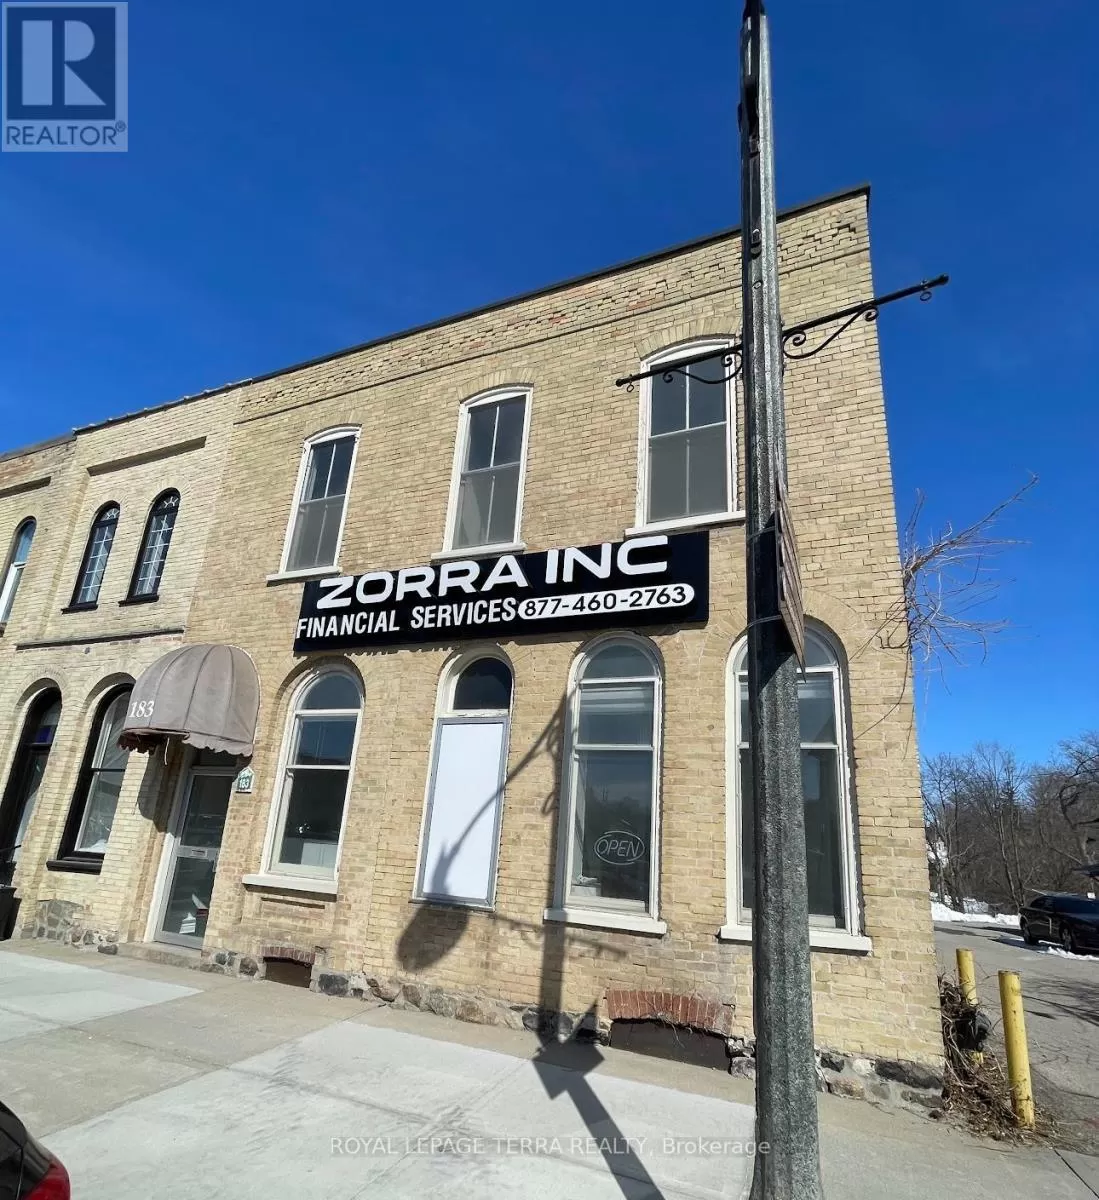 Offices for rent: 183 Thames St S, Ingersoll, Ontario N5C 2T6